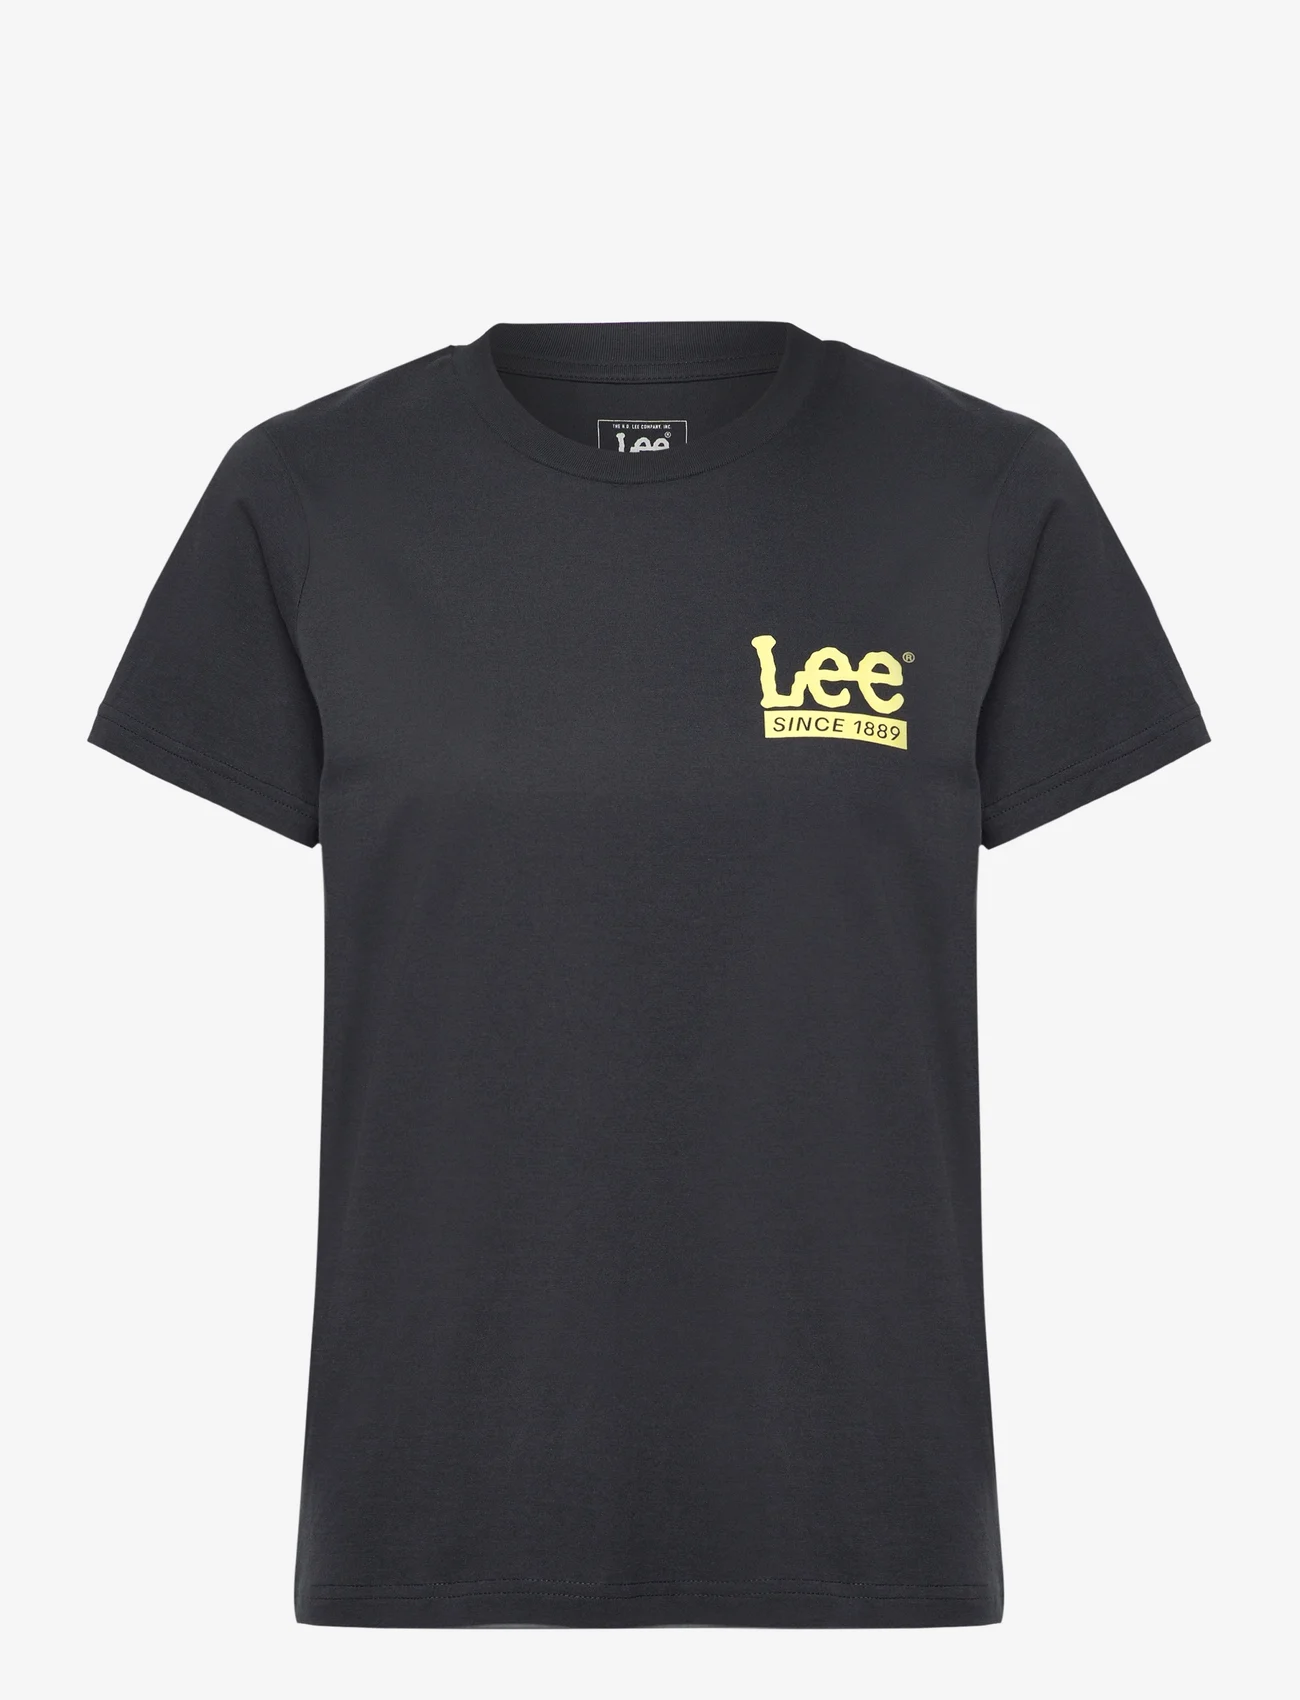 Lee Jeans - SMALL LEE TEE - laveste priser - charcoal - 0